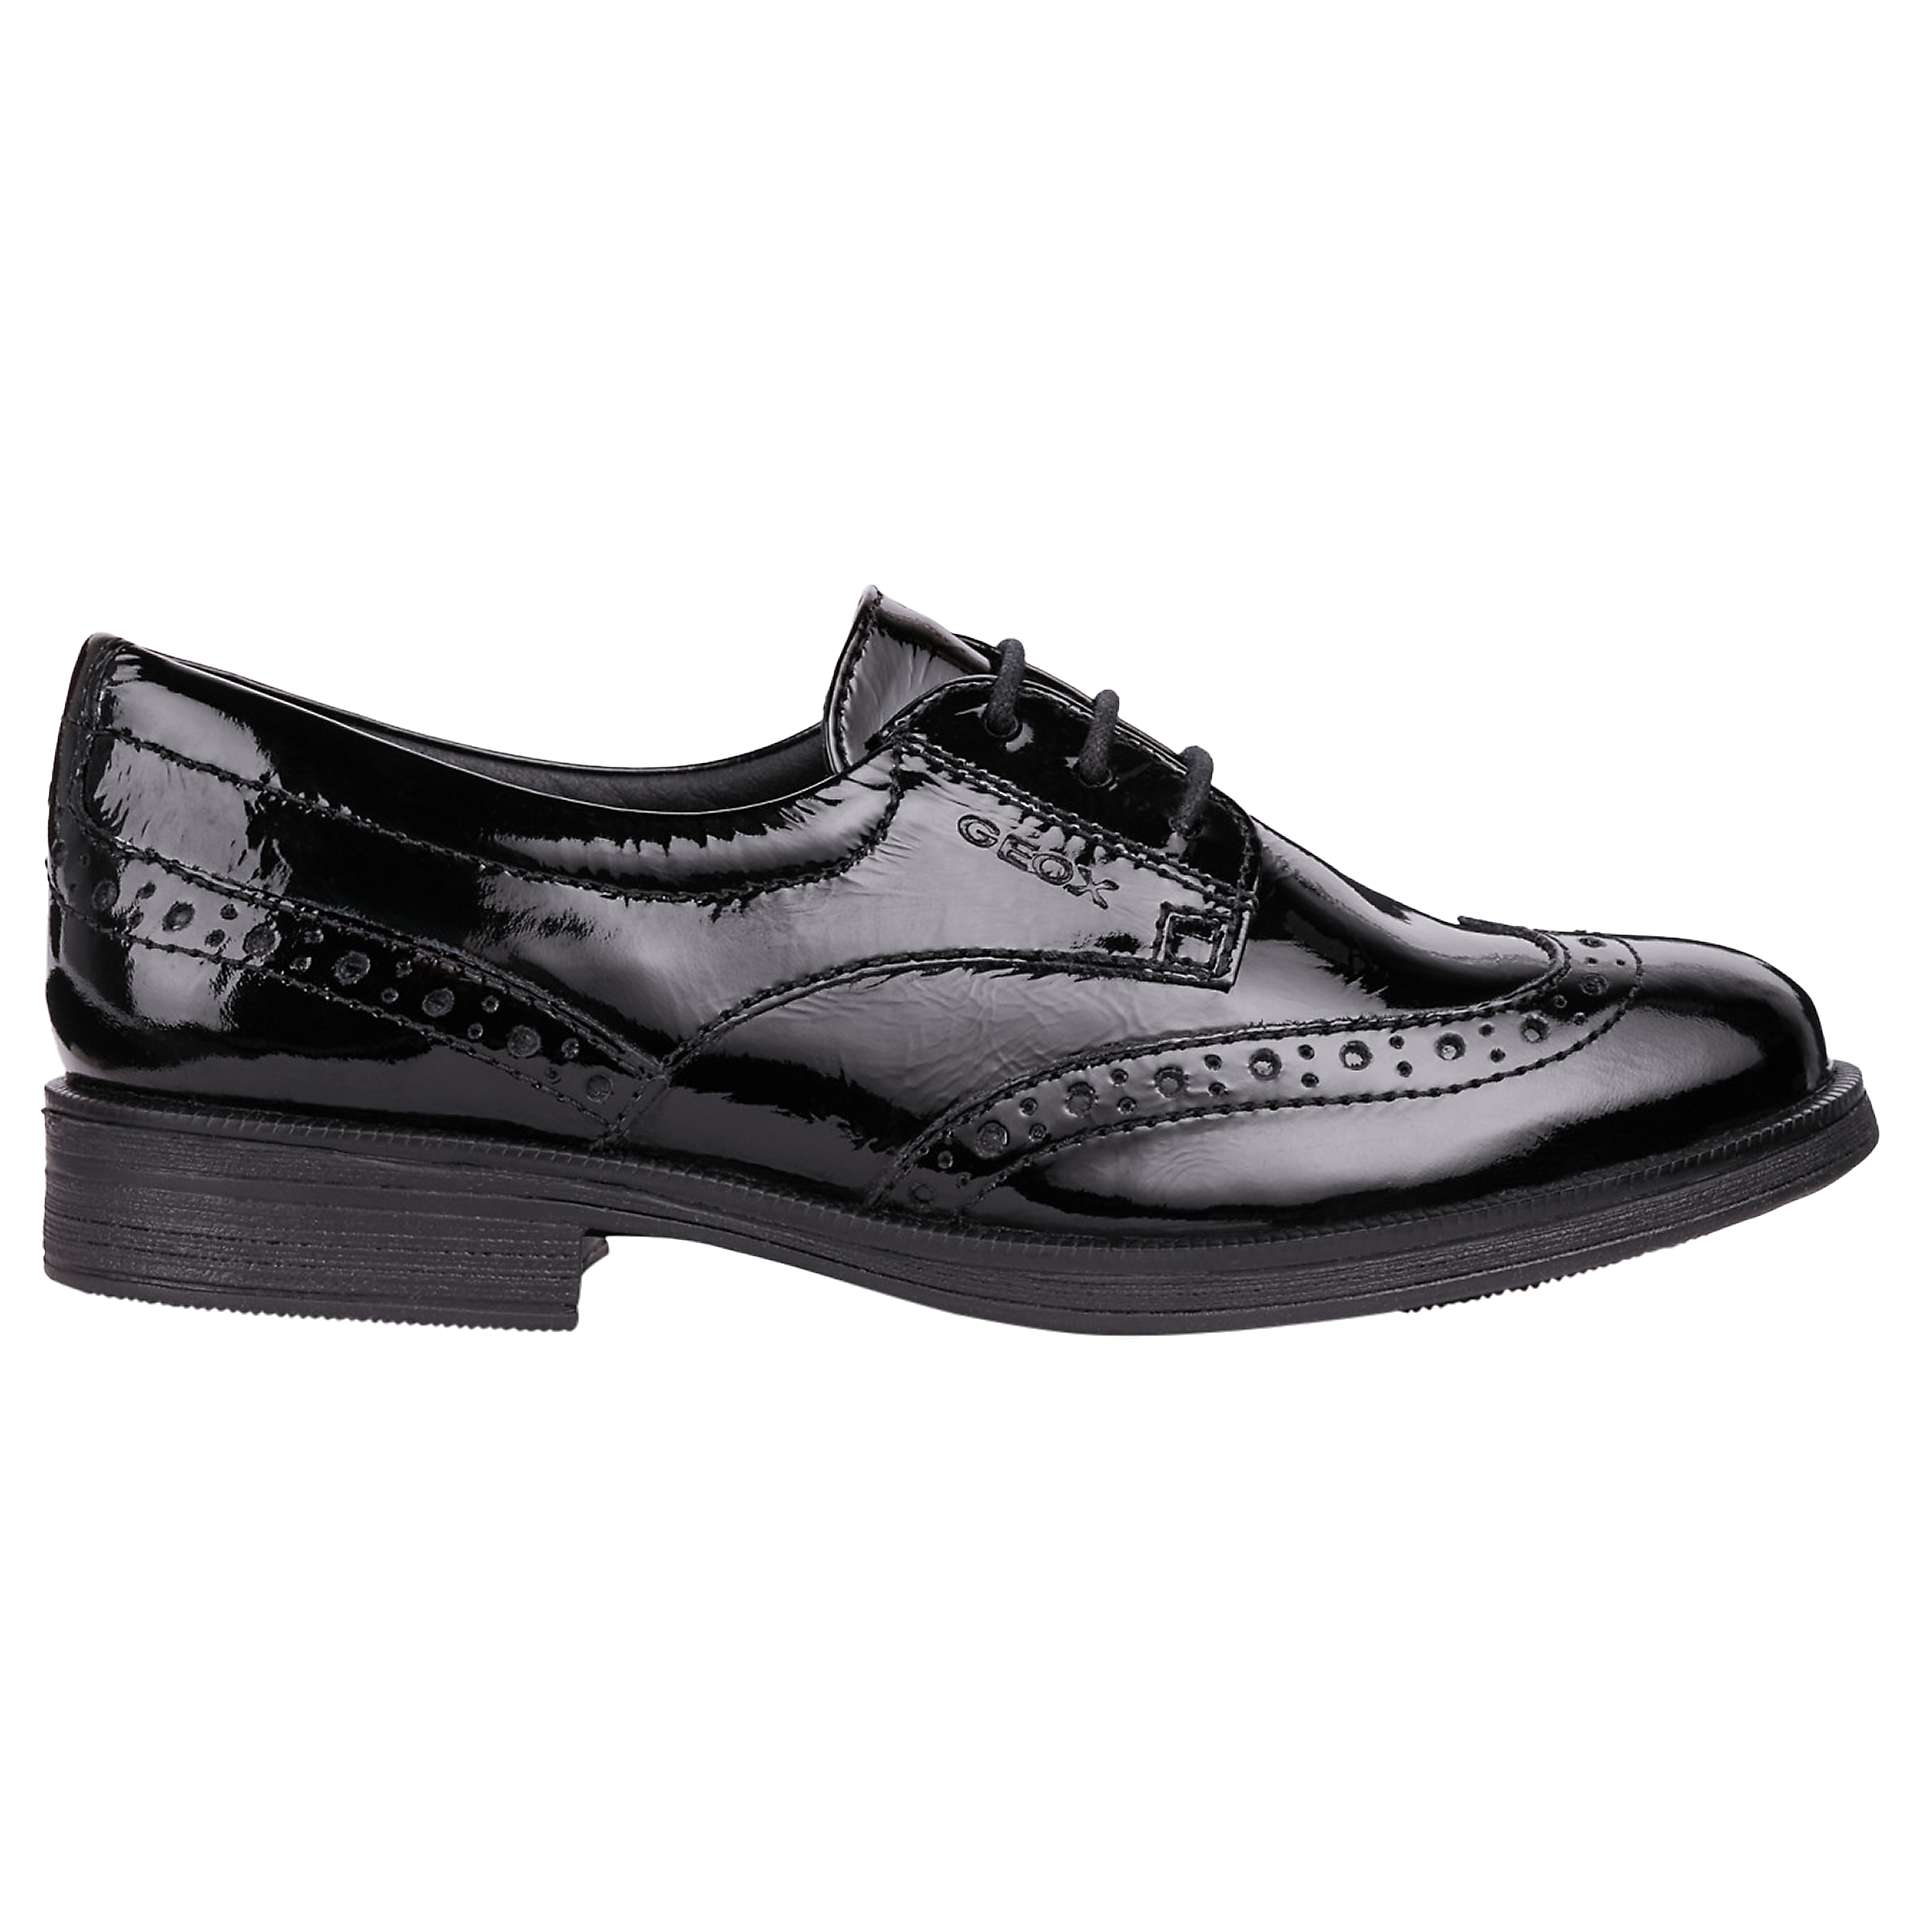 Buy Geox Kids' Agata Lace-Up Brogue Shoes, Black Patent Online at johnlewis.com